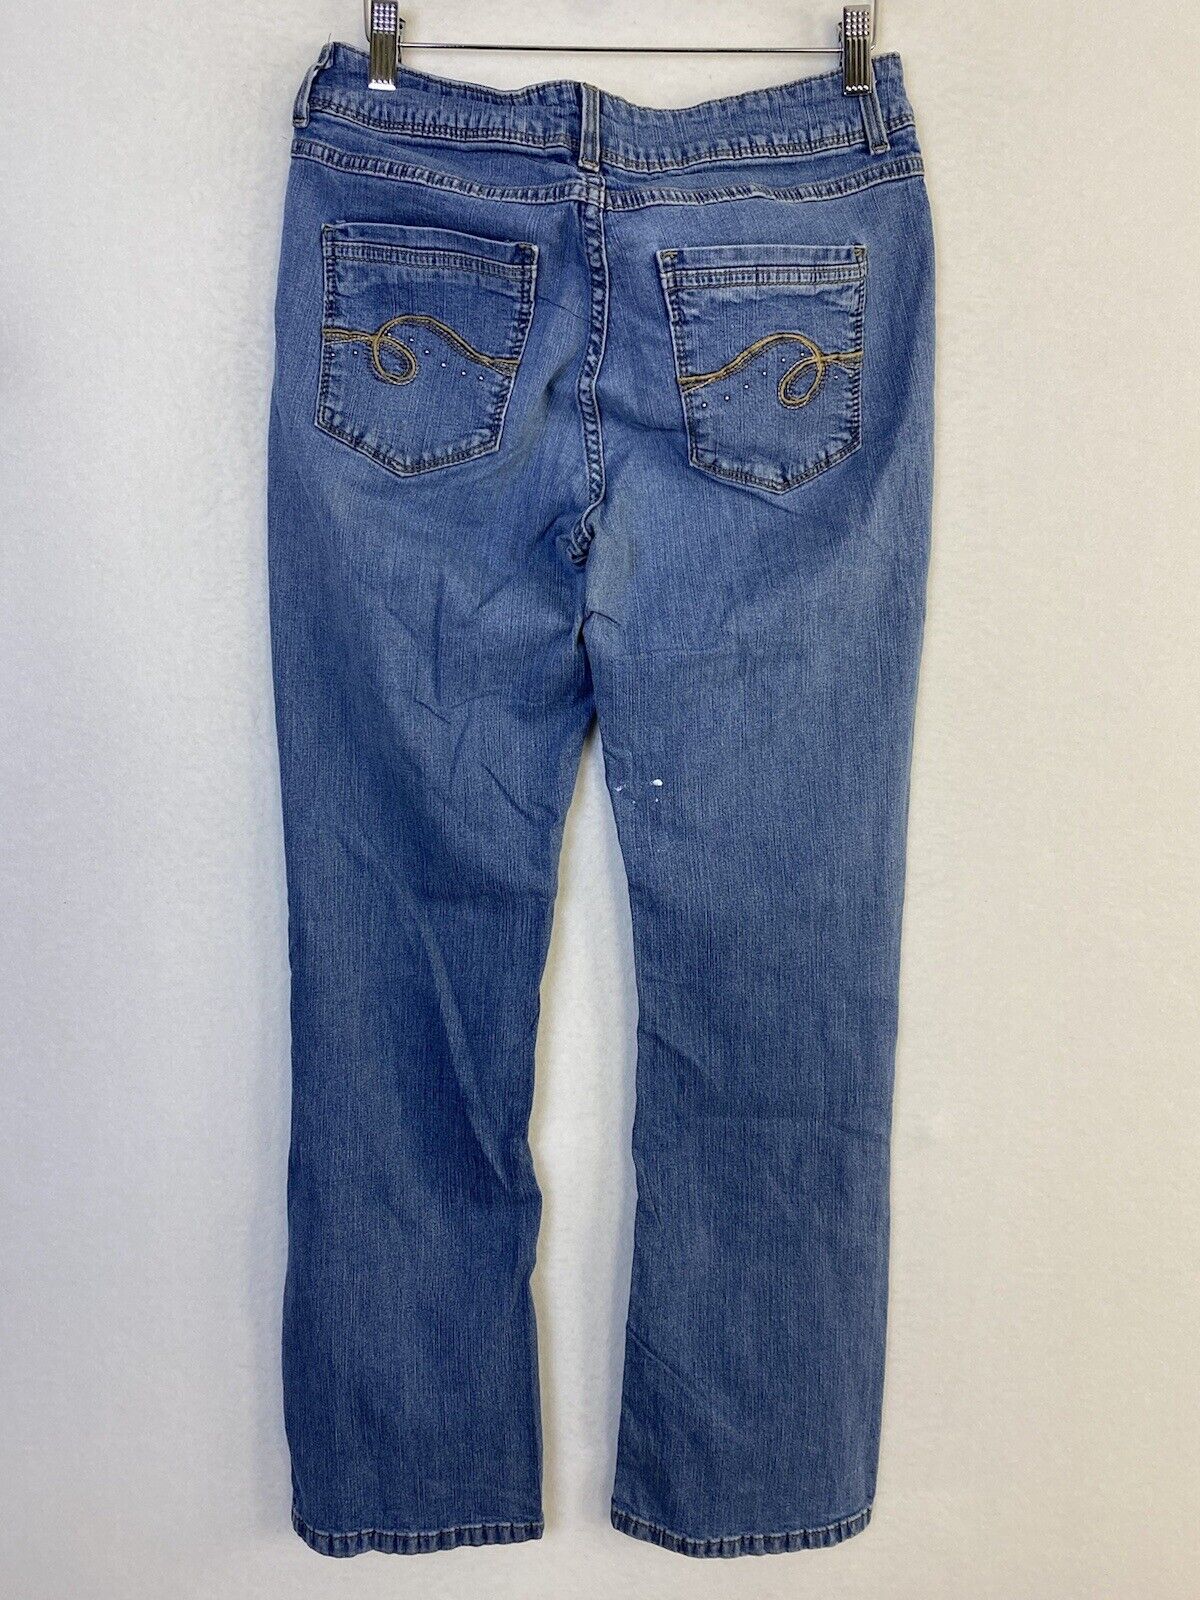 VINTAGE LEE RIDERS BLUE MOM WOMEN'S JEANS SIZE 9 - image 2